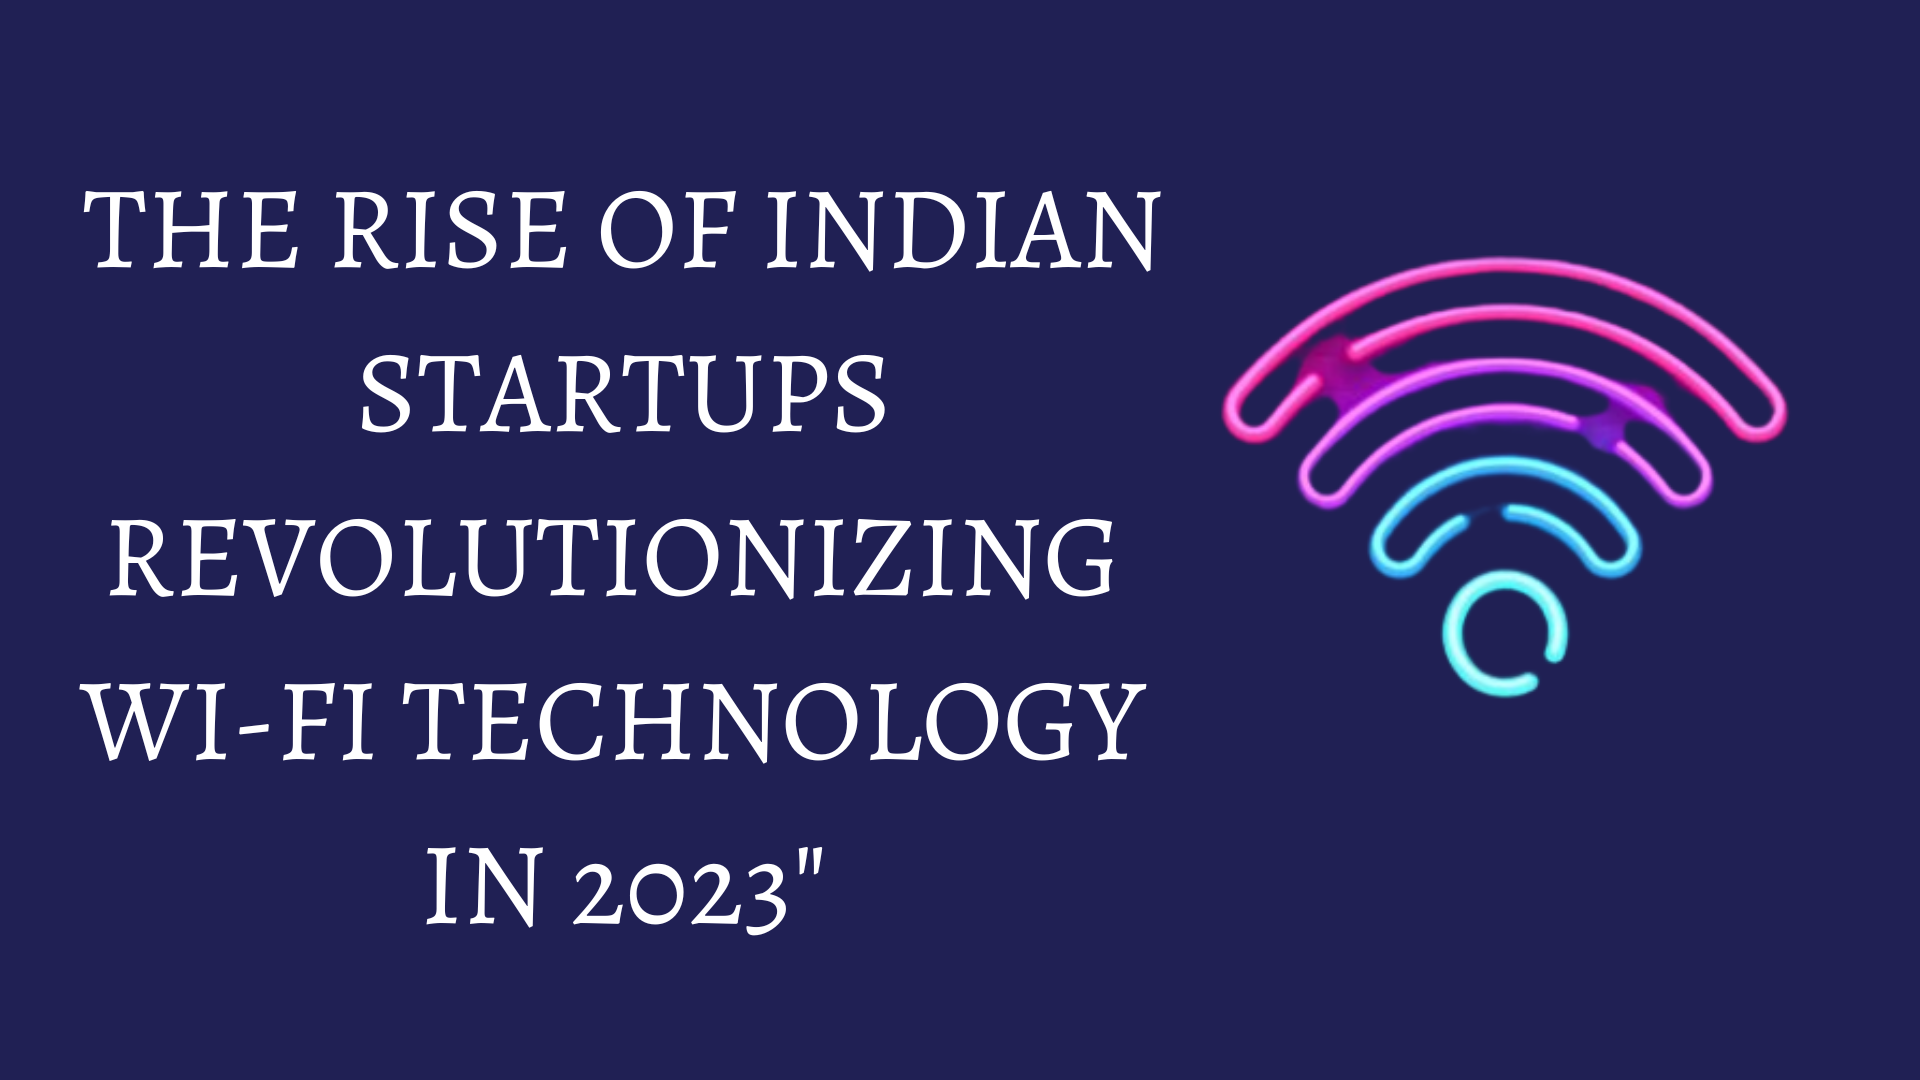 Indian startups shaking up wi-fi technology in 2023